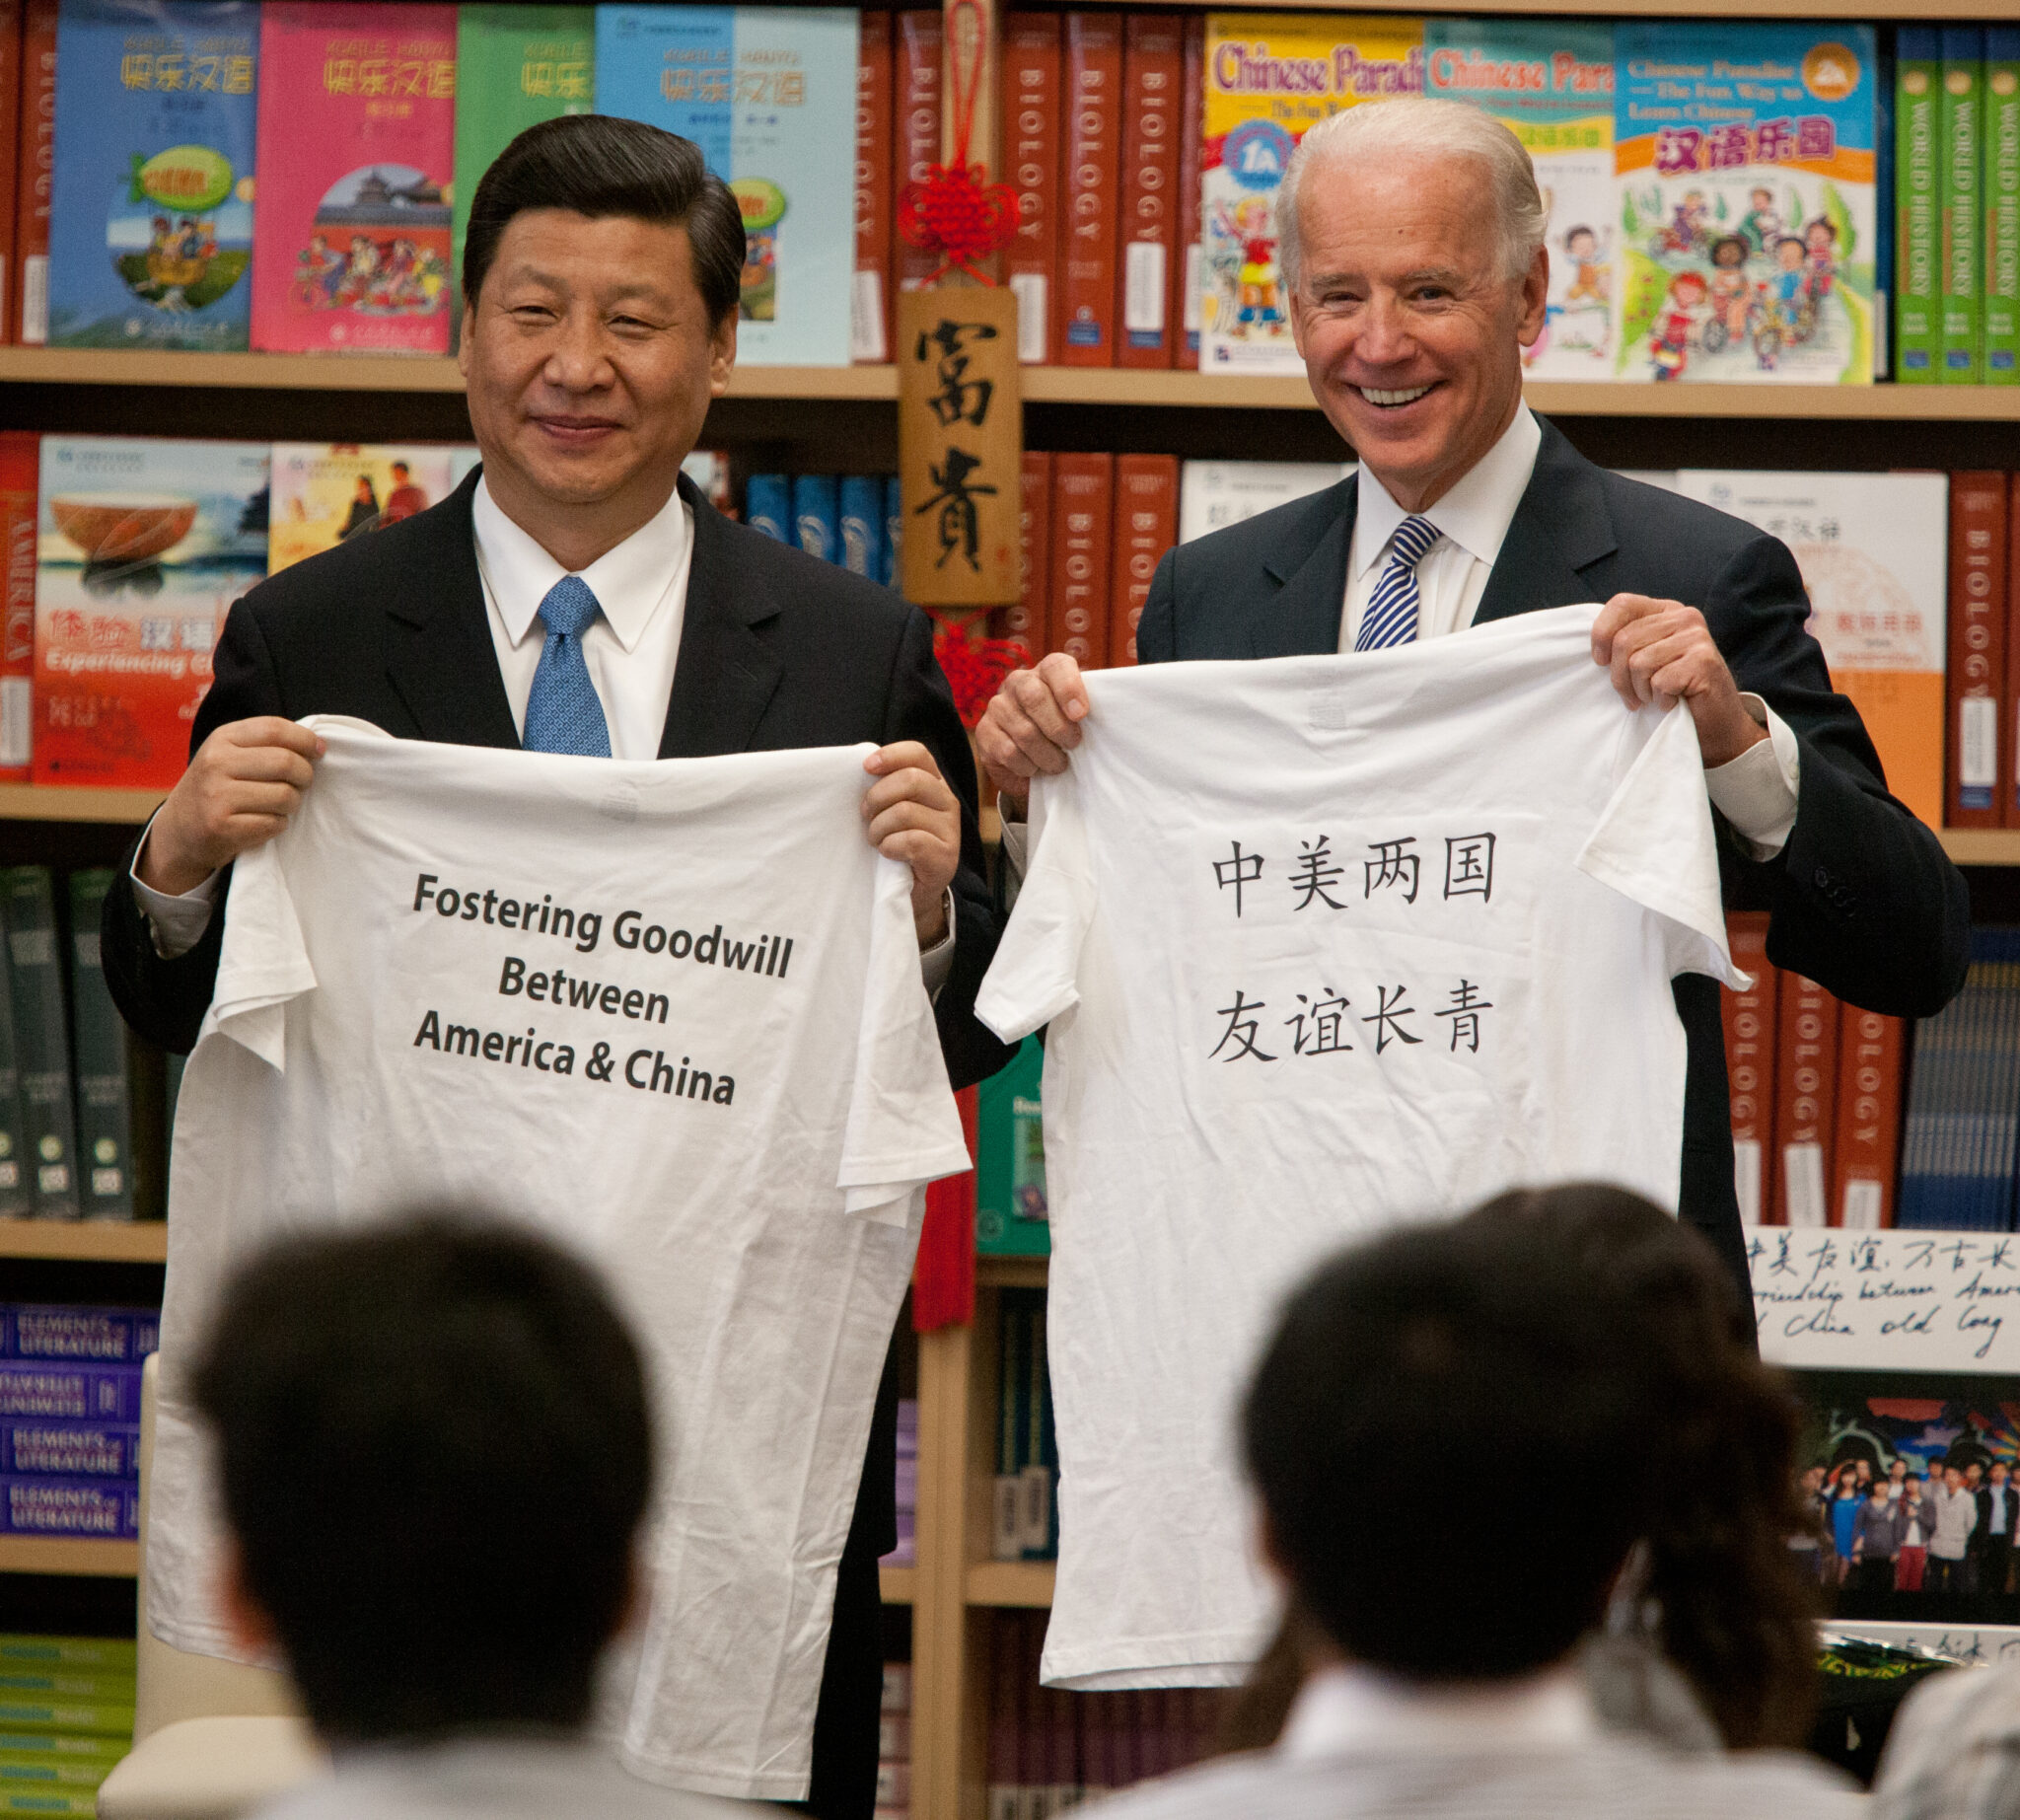 Chinese Vice President Xi Jinping and U.S. Vice President Joe Biden visit the International Studies Learning Center in South Gate, CA. (Photo by Tim Rue/Corbis via Getty Images)